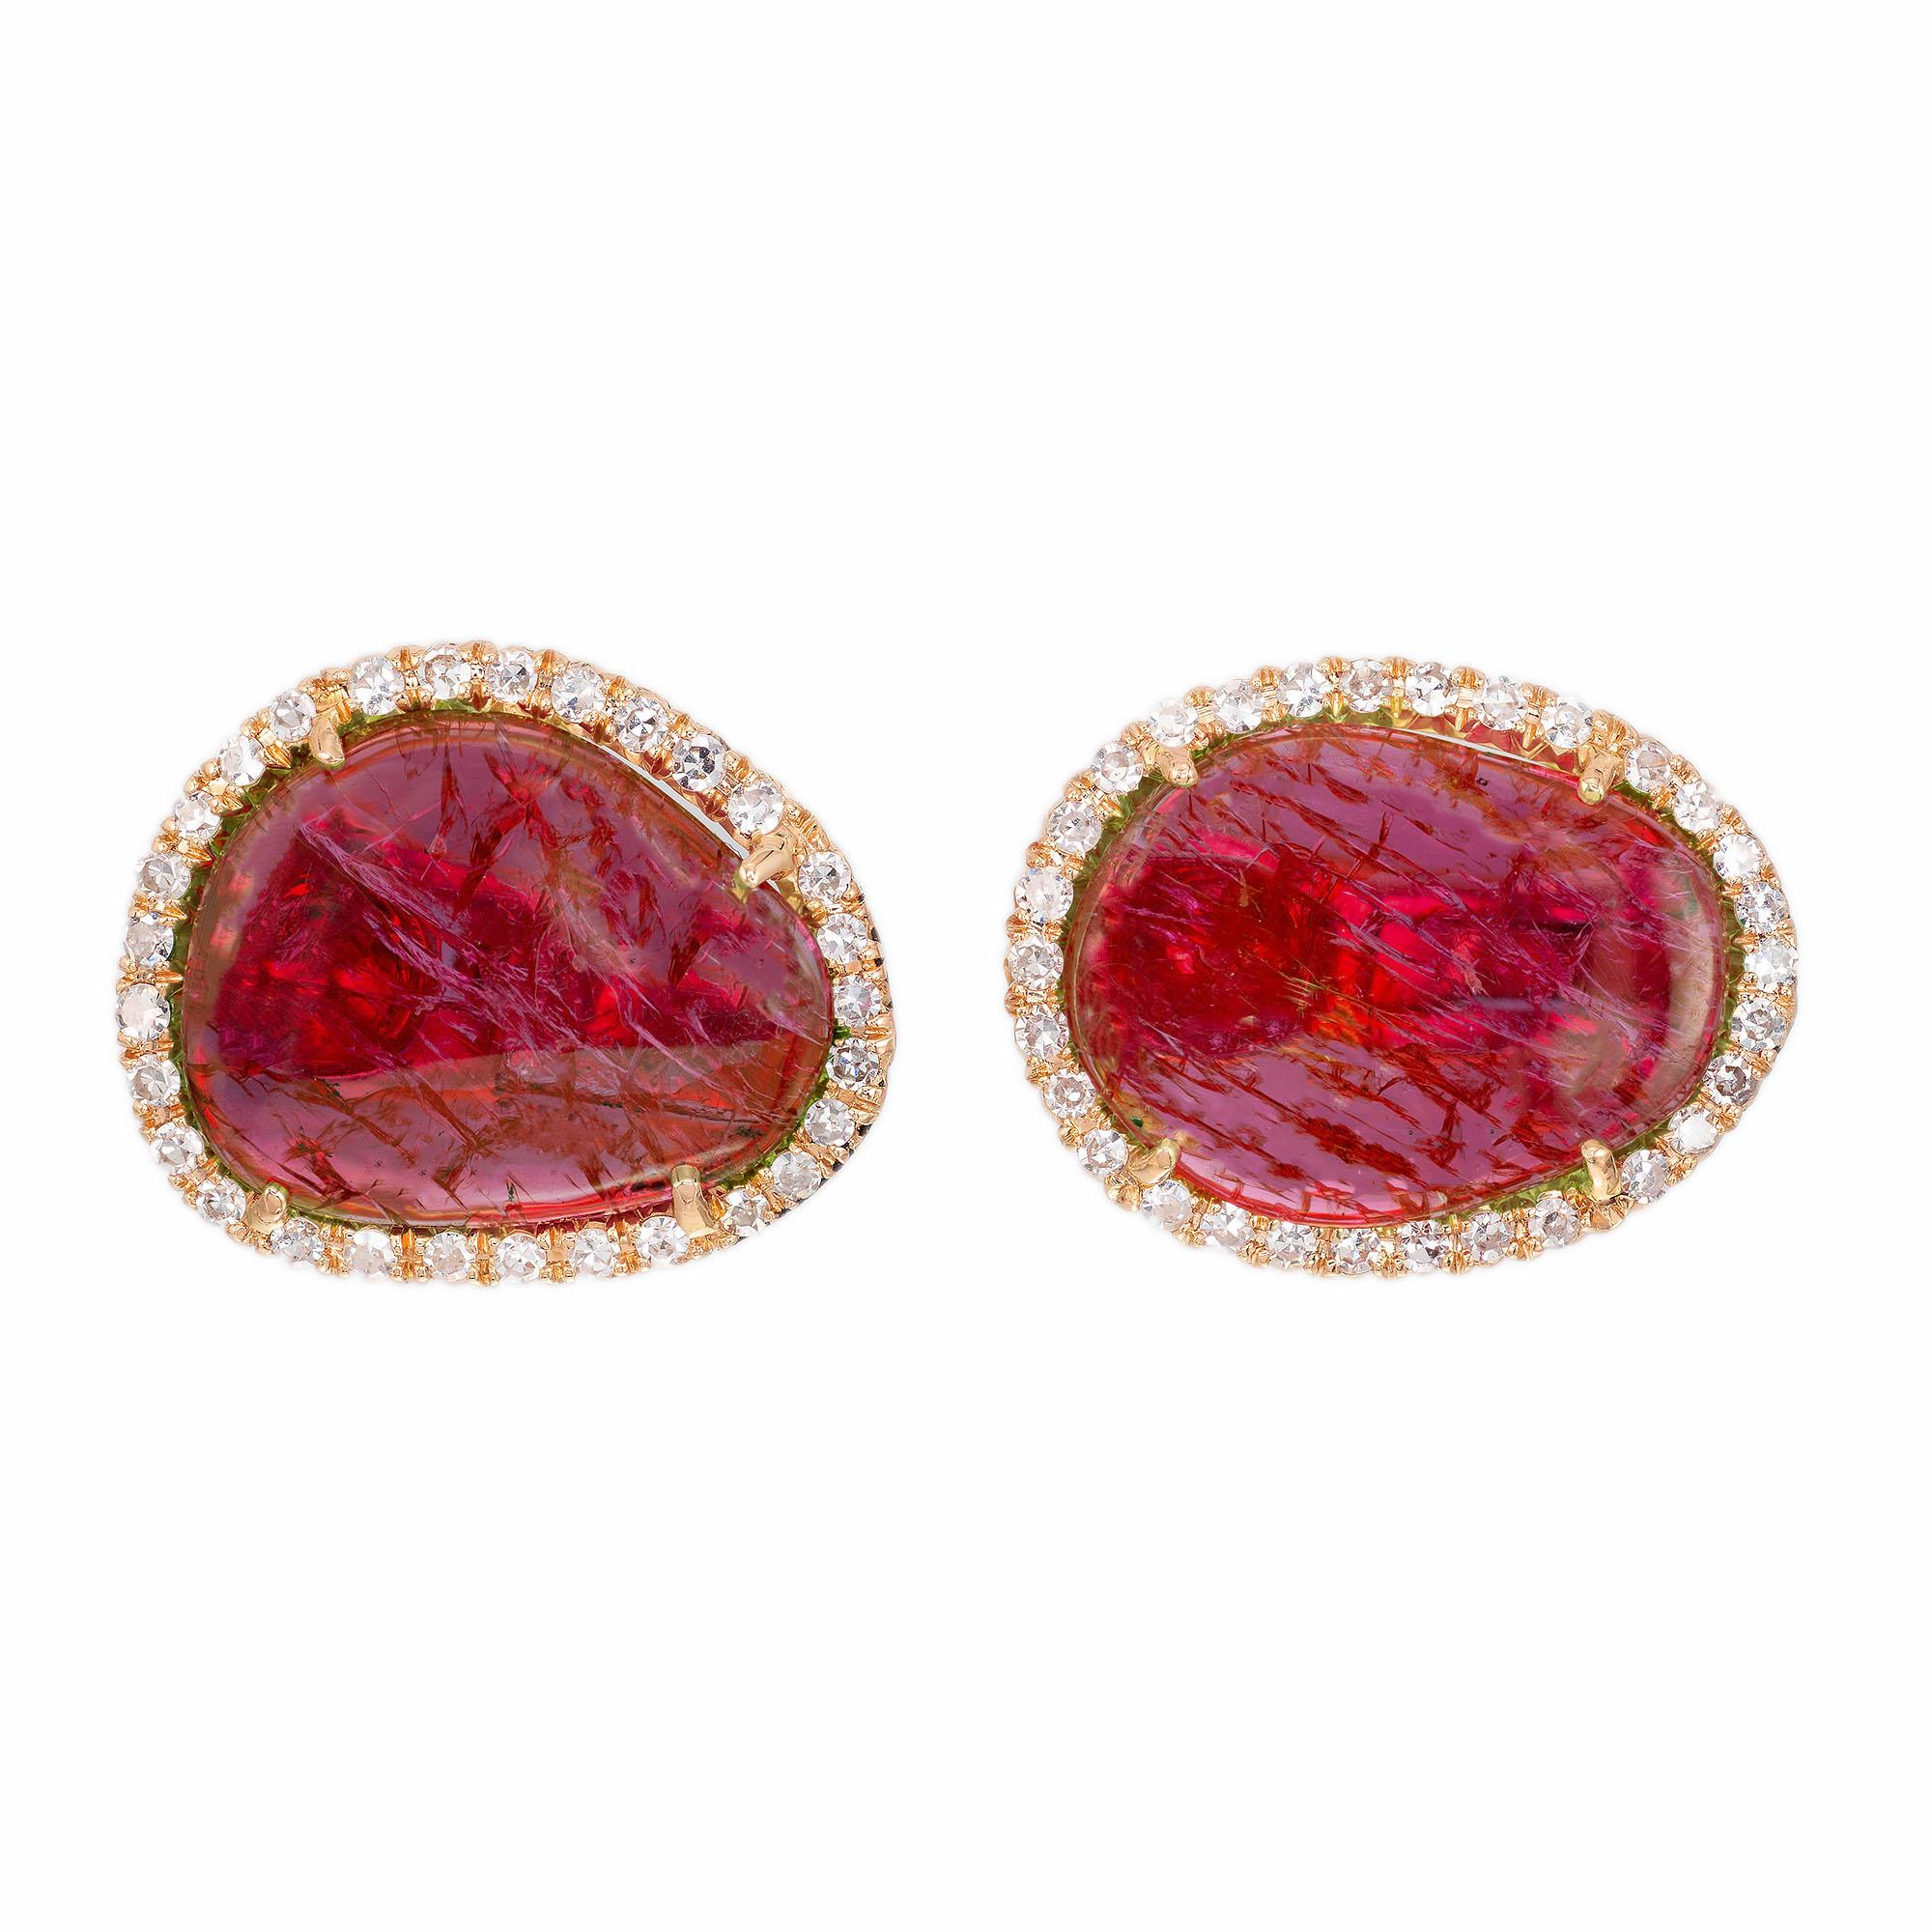 Natural untreated purplish pink sapphire slice and diamond earrings. Set in 18k yellow gold with round diamond halos. Clip and post style. GIA certified.

2 free form purplish pink cabochon sapphires MI, approx. 9.00cts GIA certificate